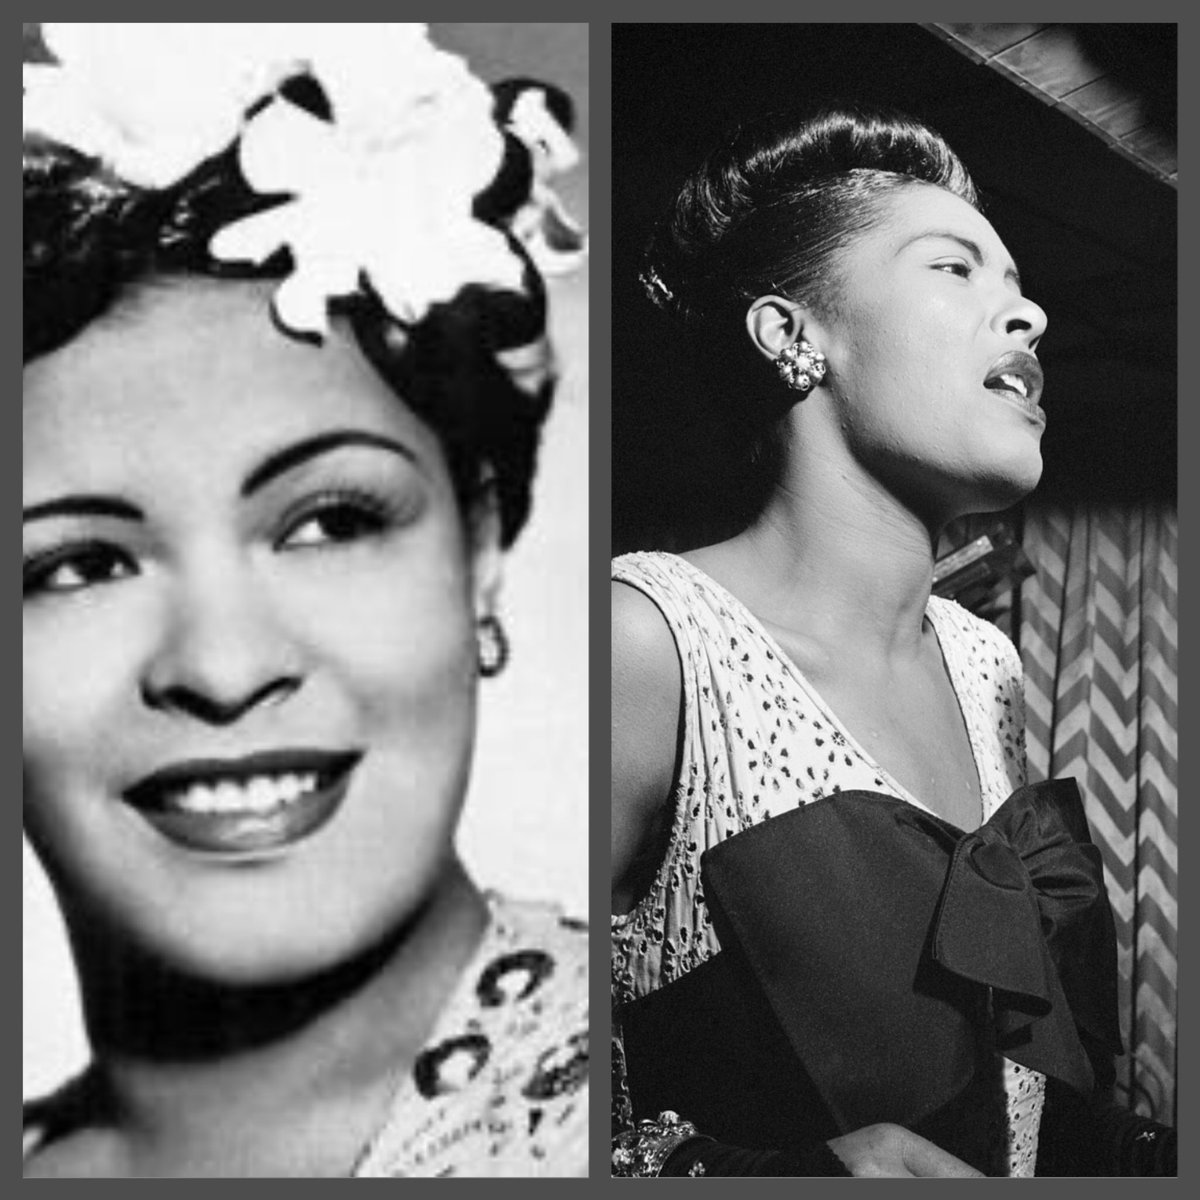 Eleanora Fagan (Billie Holiday) a queer Black woman was born in Philadelphia,PA in 1915. Her career which spanned 26 years earned her the nickname “Lady Day”. She influenced both jazz and pop. Her song “Strange Fruit” made her a target of the FBI who tried to silence her. #BHM  